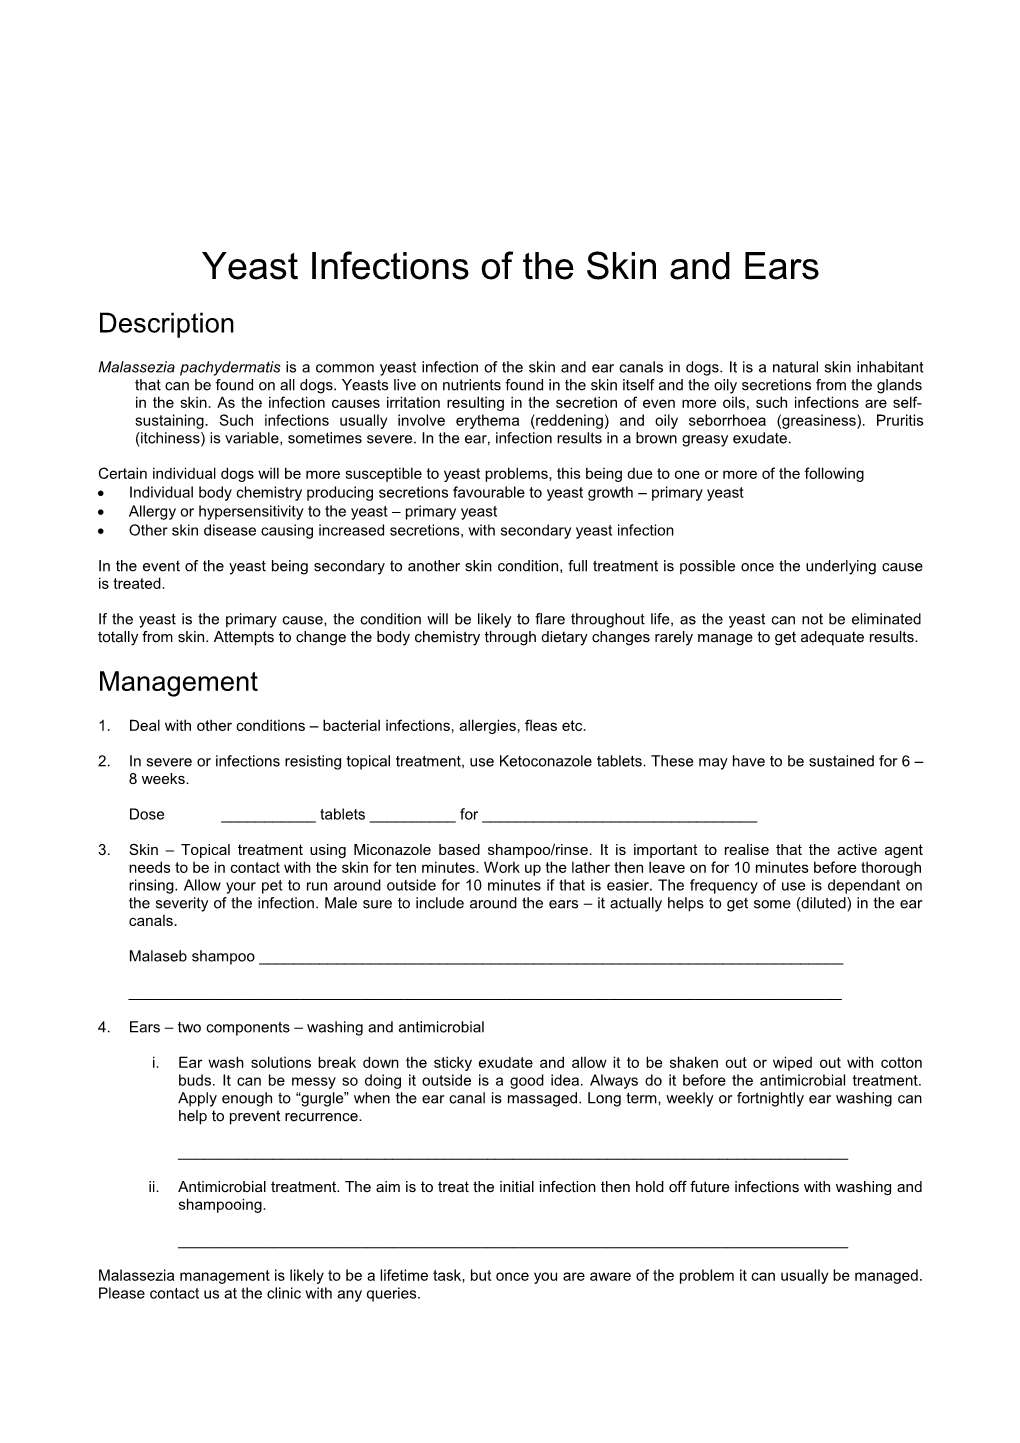 Yeast Infections Of The Skin And Ears